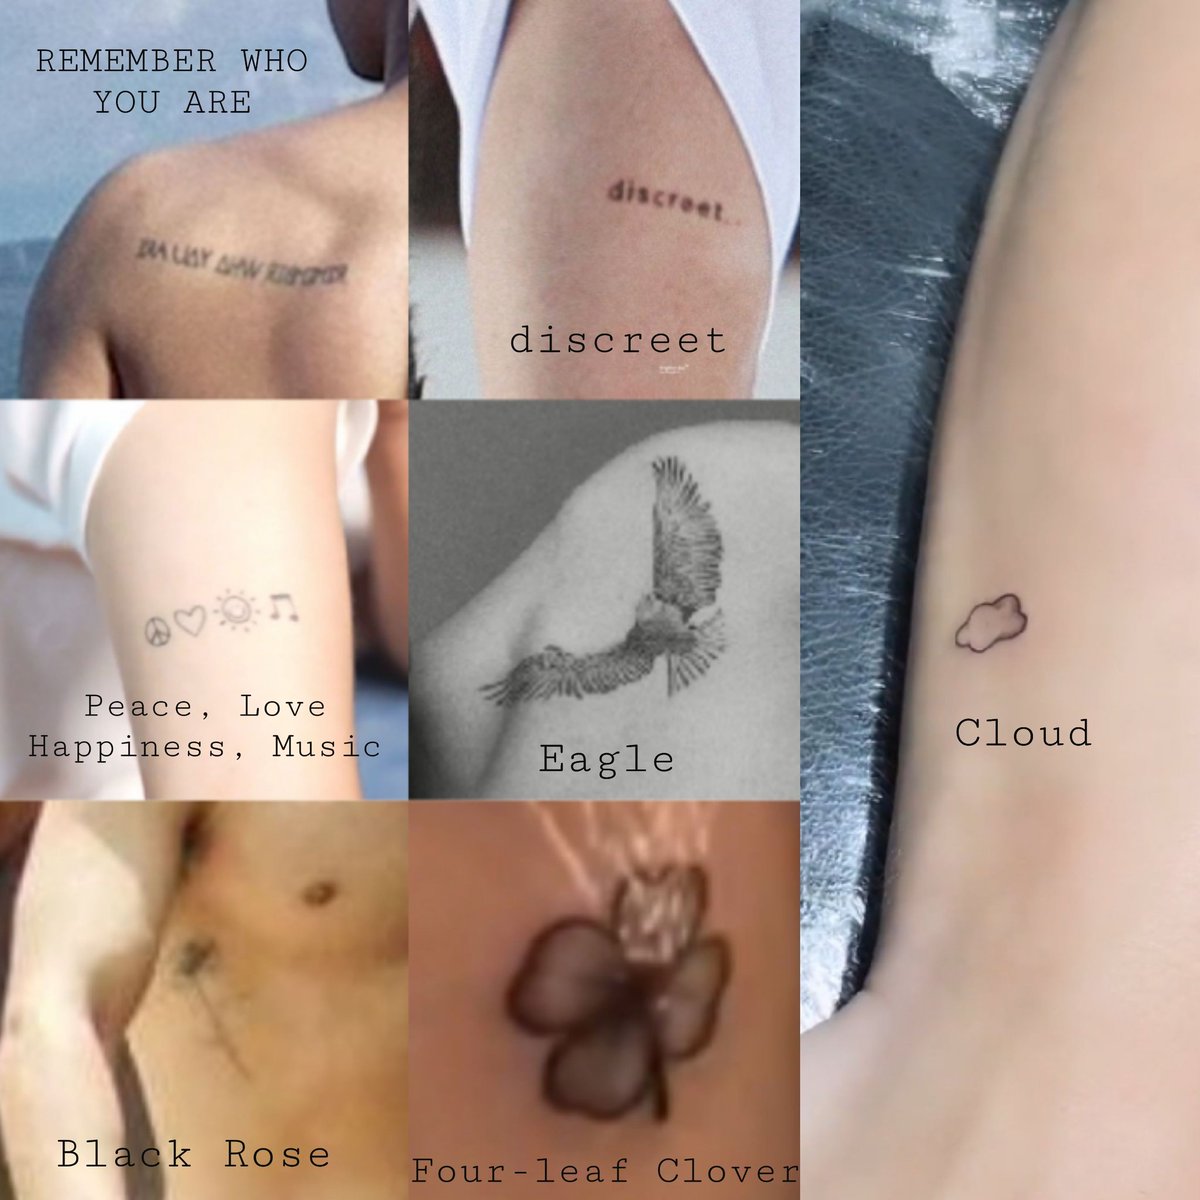 'I view them as an art, a diary on my body. I will only have tattoos that are meaningful and relating to those in my life stage.'

• REMEMBER WHO YOU ARE
• discreet
• ☮️ ♡ 🌞 🎵 
• Eagle 🦅
• Black Rose🌹 
• Four-leaf Clover 🍀
• Cloud ☁️

Bright Vachirawit 
#bbrightvc